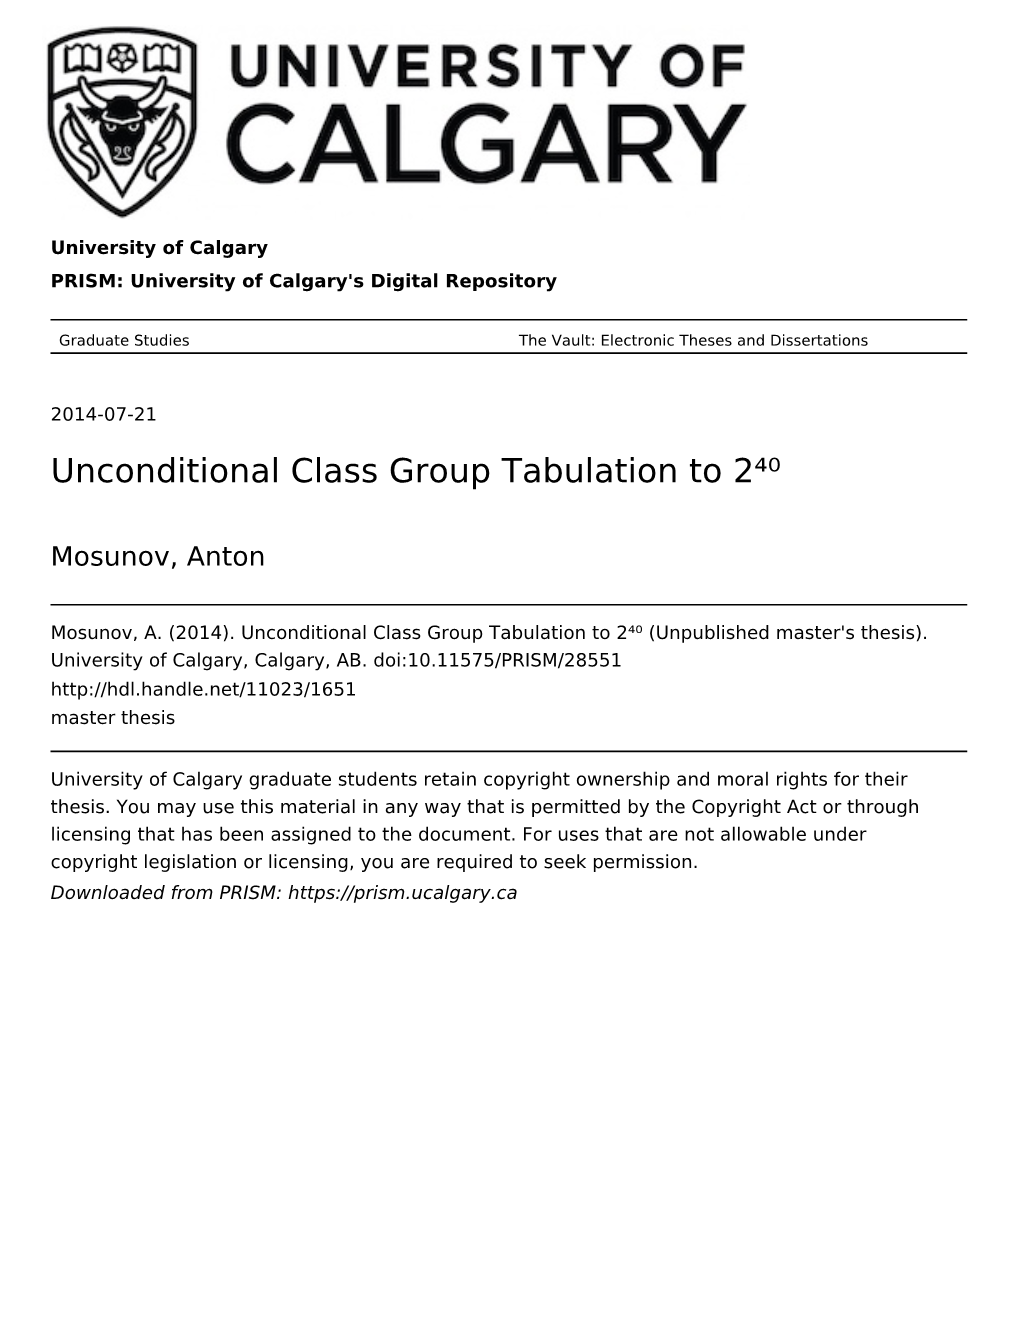 Unconditional Class Group Tabulation to 2⁴⁰